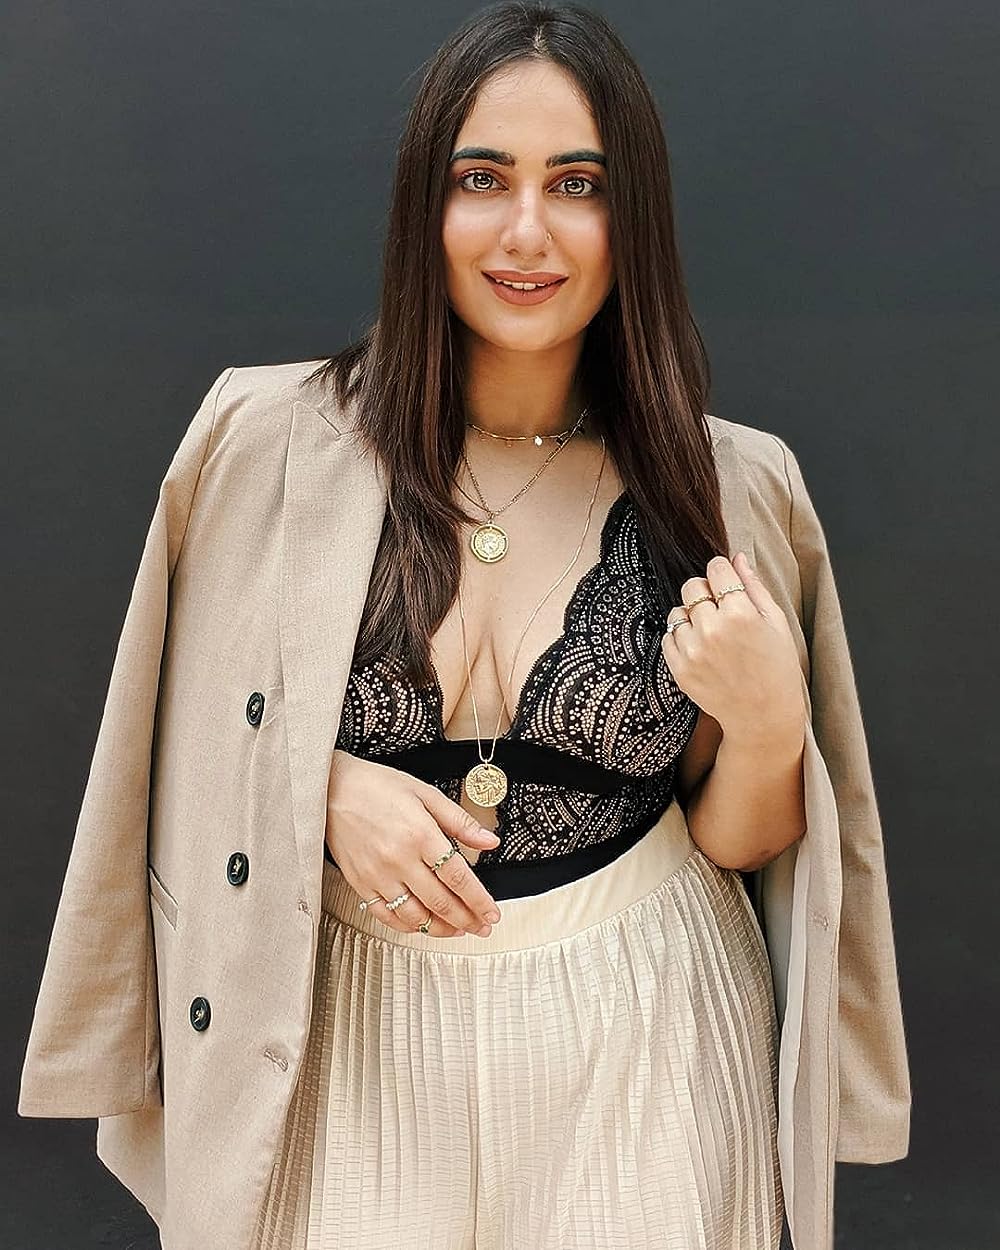 Kusha Kapila, fondly known as Billi Masi, has become a prominent name in Bollywood, known for her collaborations with industry bigwigs to promote films and brands. Her journey from social media to mainstream entertainment has been nothing short of remarkable.